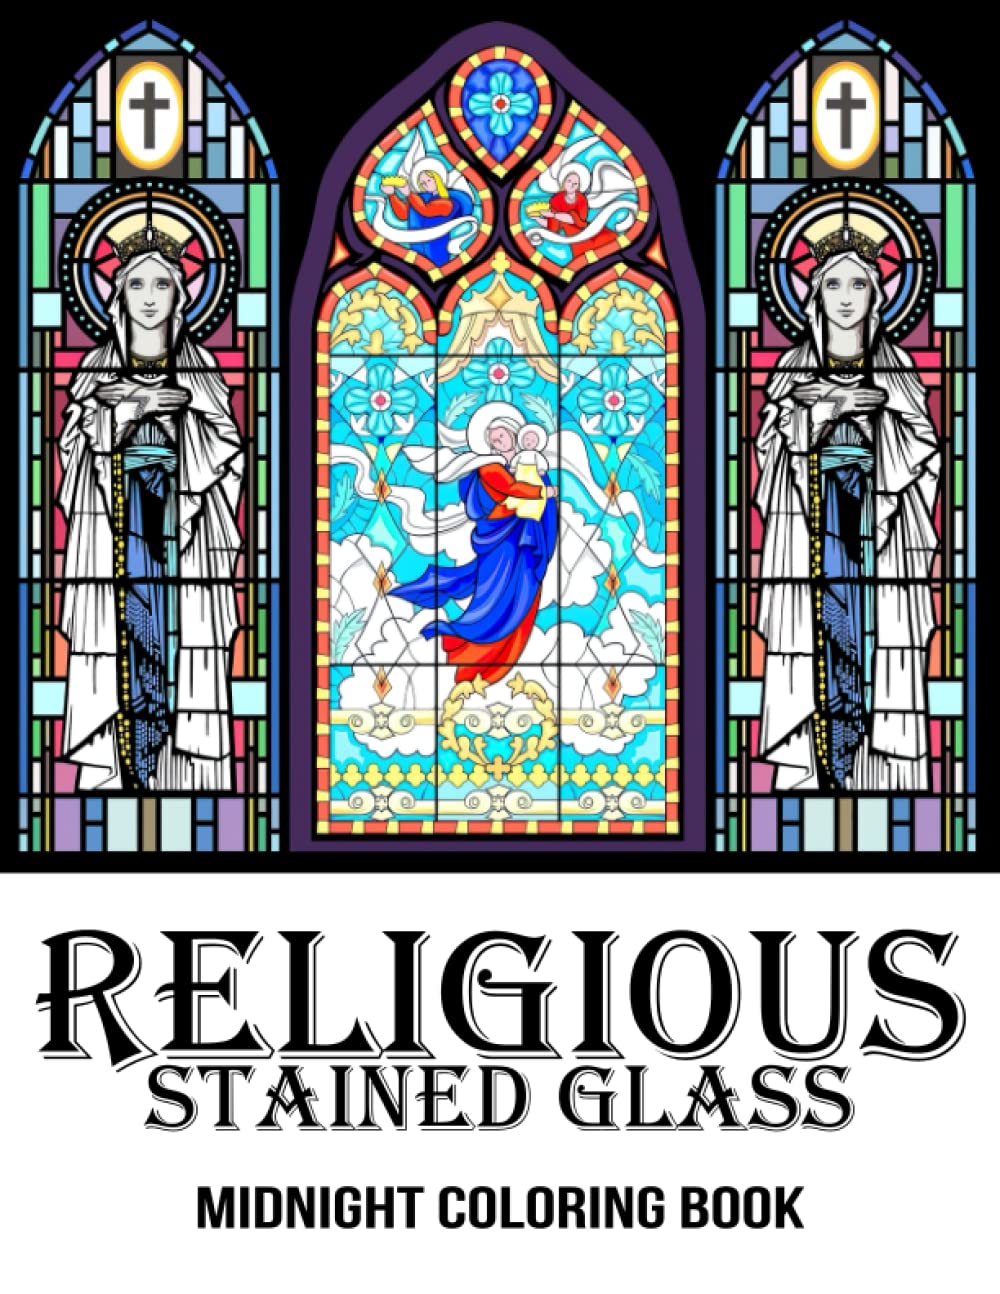 Midnight religious stained glass coloring book amazing coloring pages with incredible illustrations for all ages boys girls relieving stress relaxation by remington huff